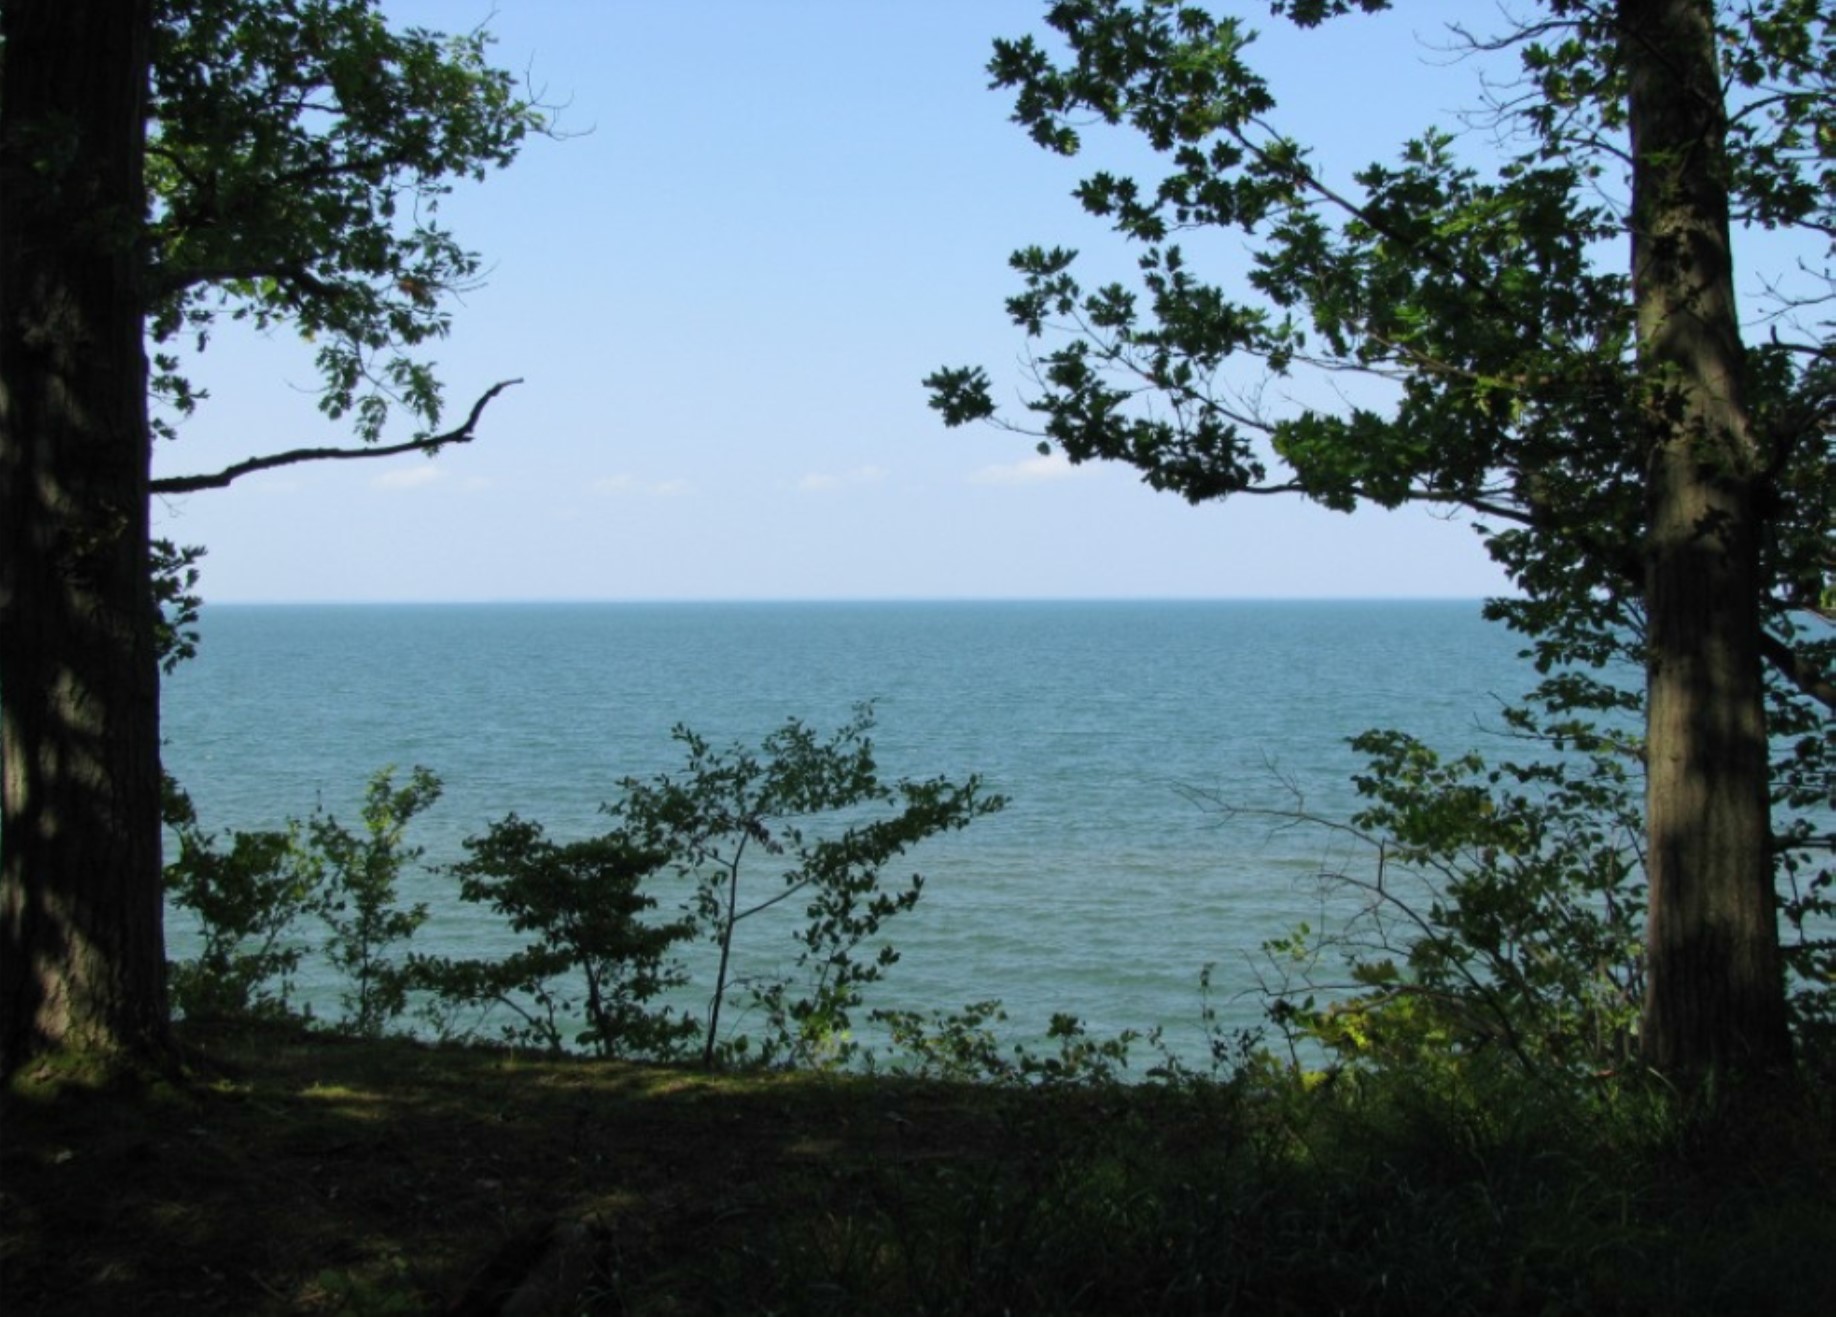 Land donation protects Lakeshore Forest; Land Conservancy seeks community’s help to cover costs